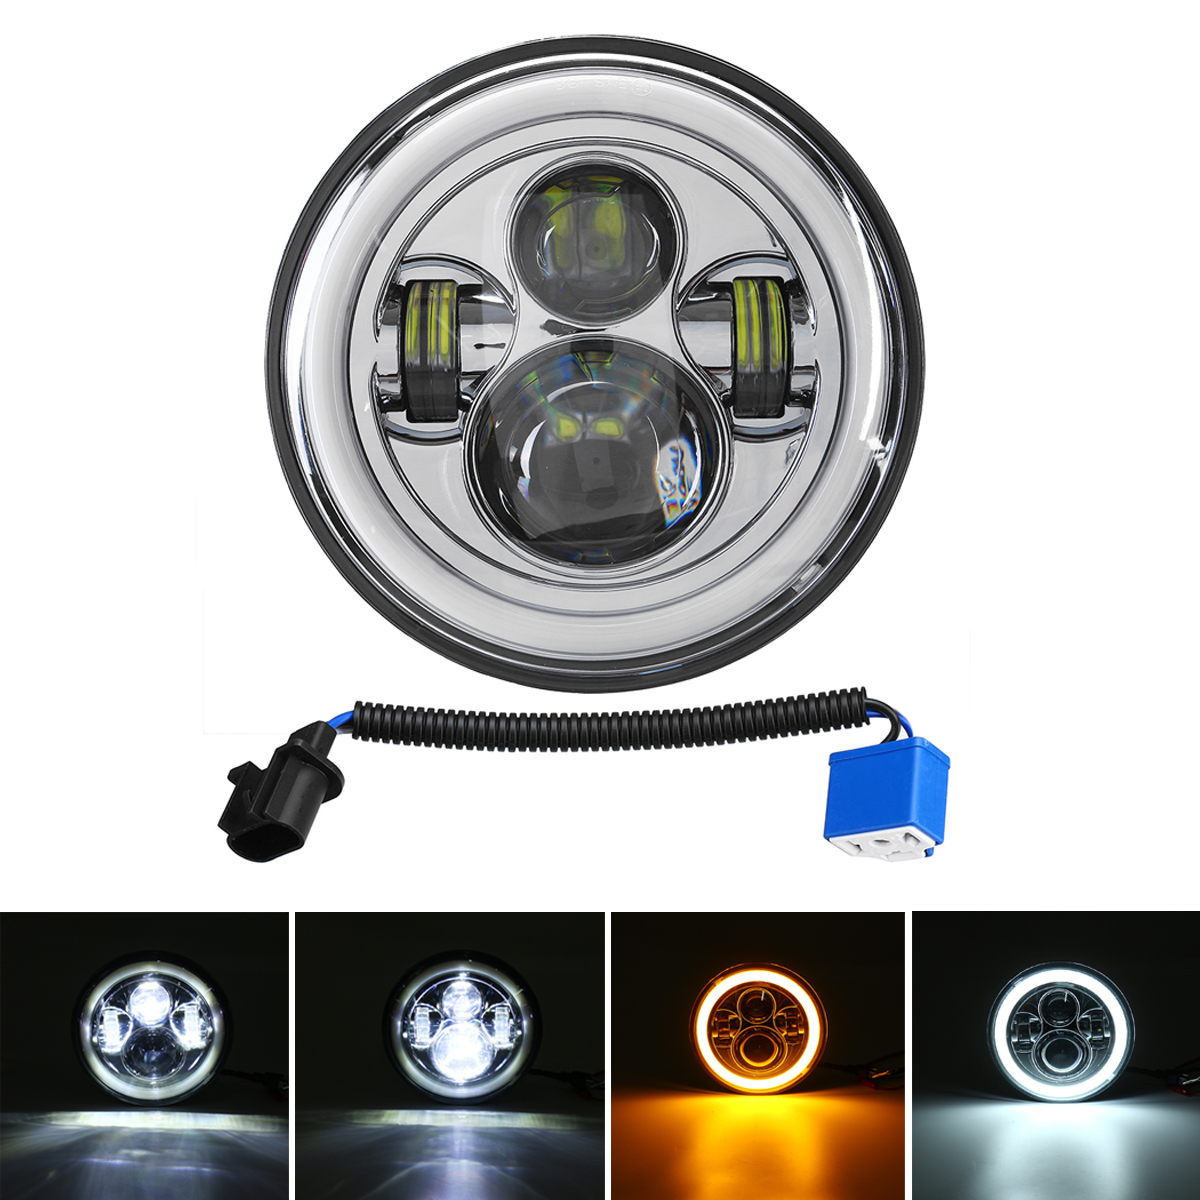 7 Inch LED Headlight Projector Angle Eyes Hi/Low DRL Turn Signal Lamp for Jeep Motorcycle